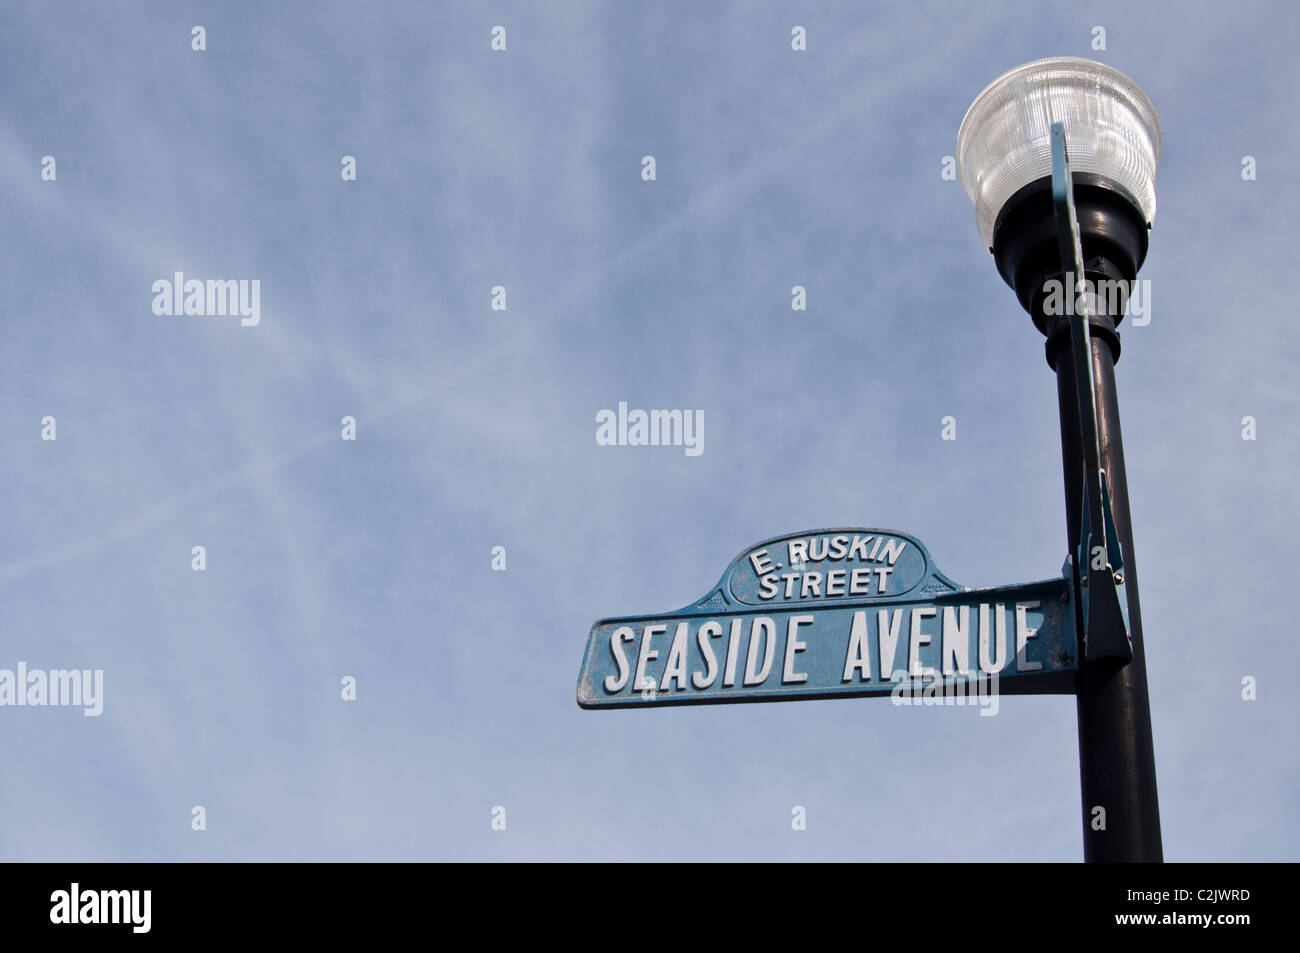 A street sign at the intersection of Seaside Avenue and E. Ruskin Street in Seaside, Florida. Stock Photo